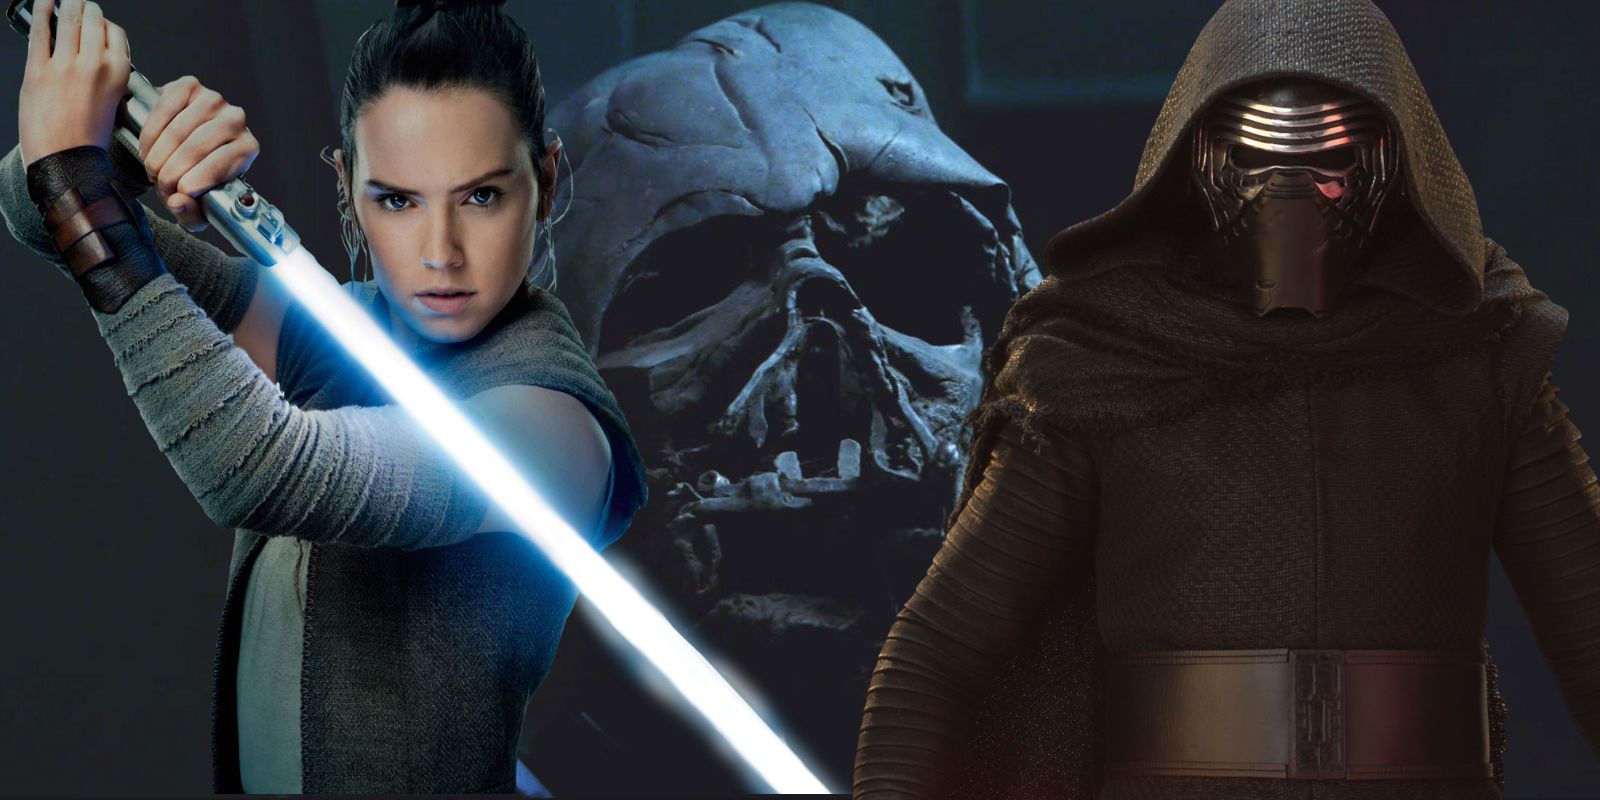 Darth Vader mask, Daisy Ridley as Rey and Kylo Ren in Star Wars